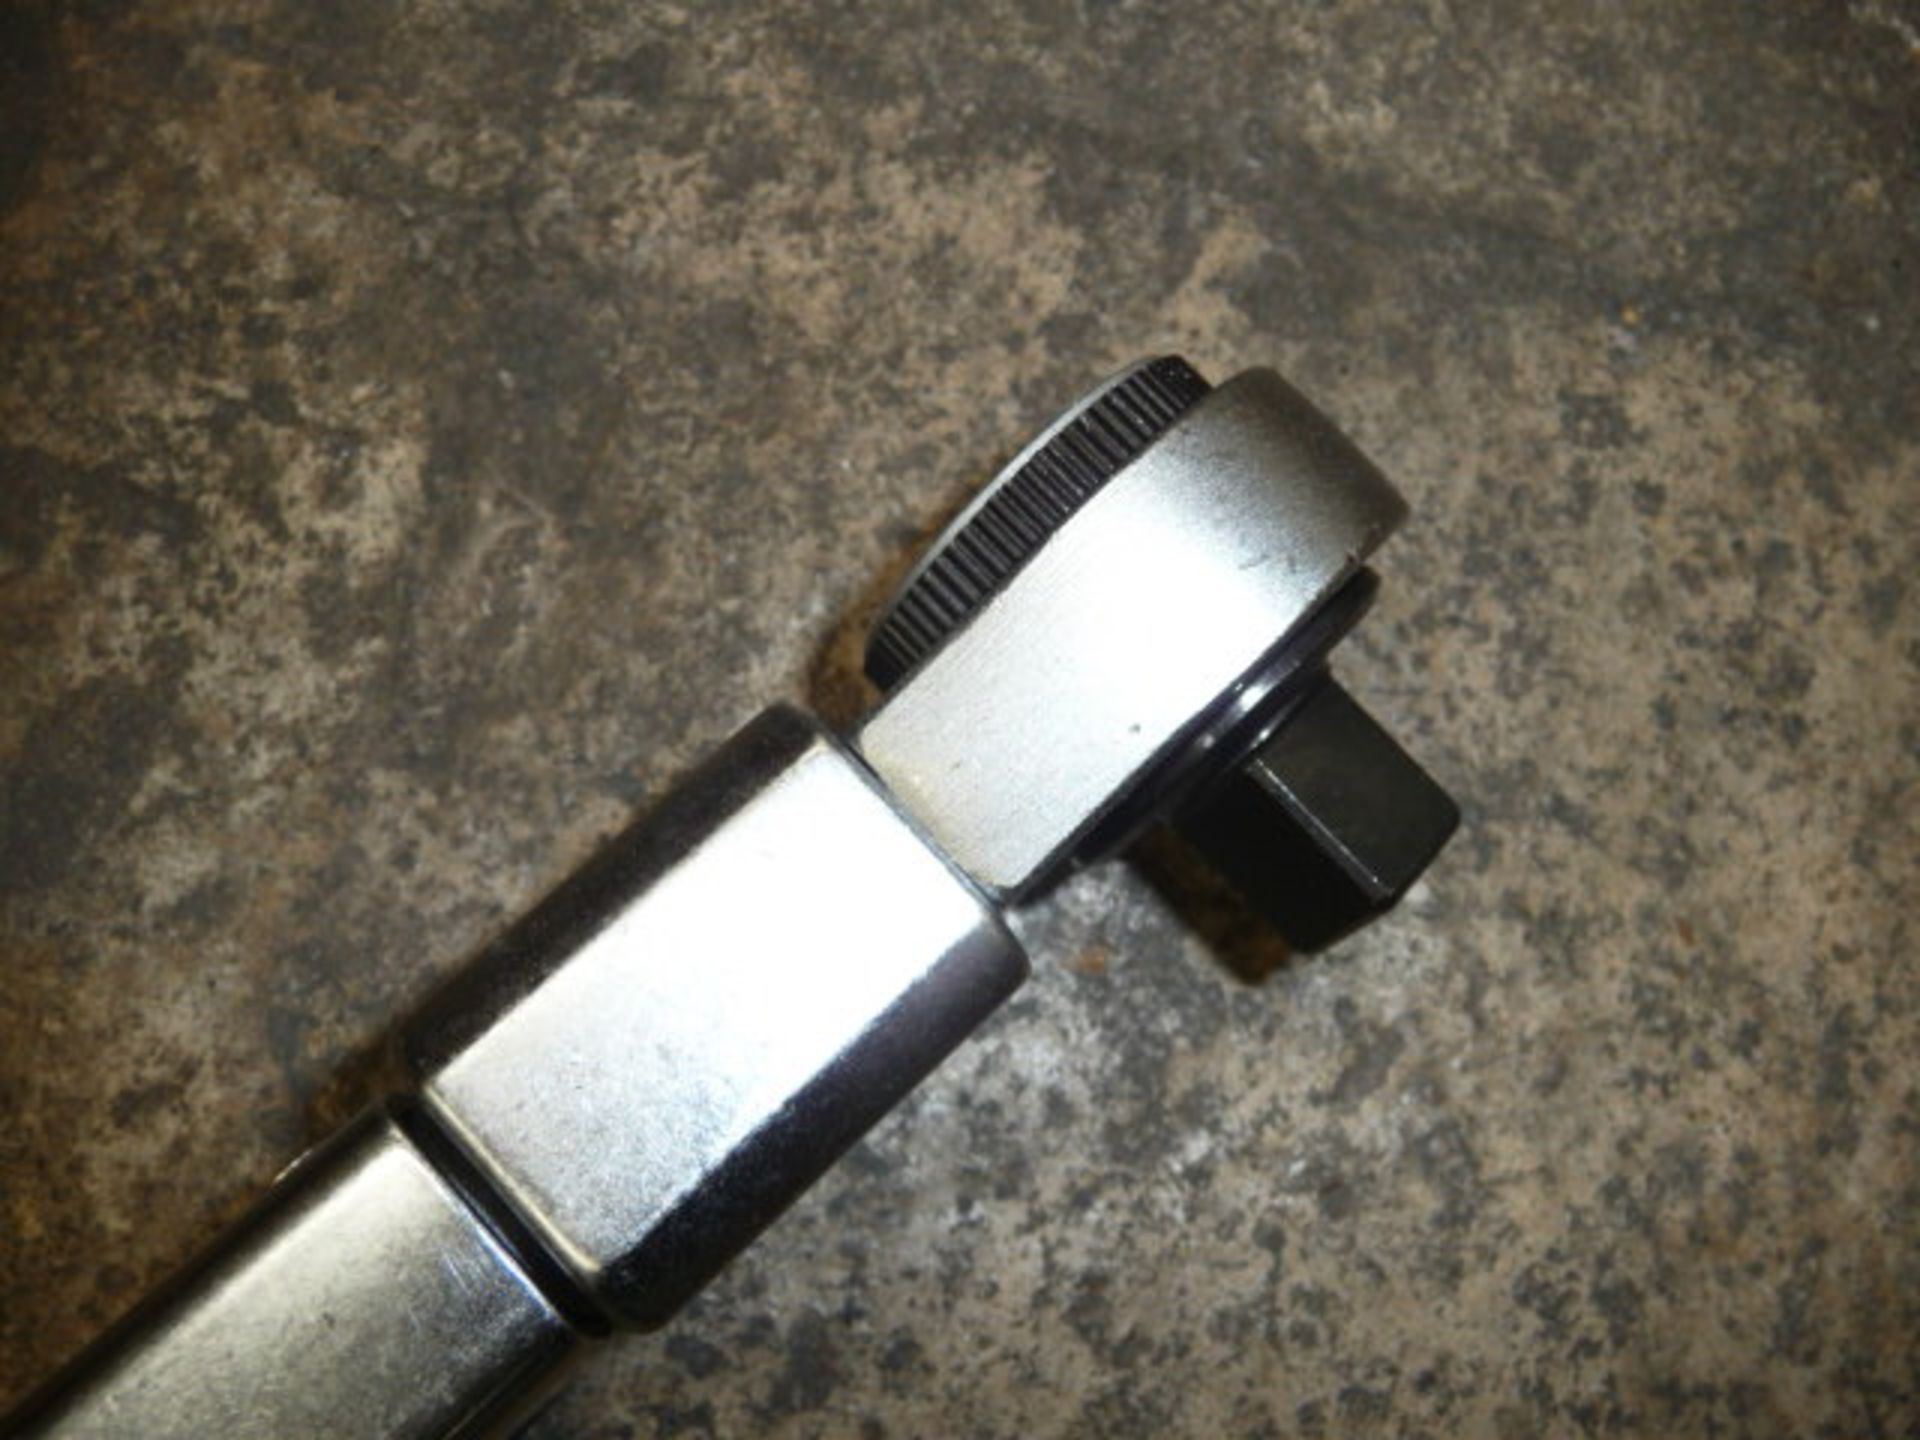 Mercedes-Benz Type Stahlwille Torque Wrench 730R/12 - Image 3 of 8